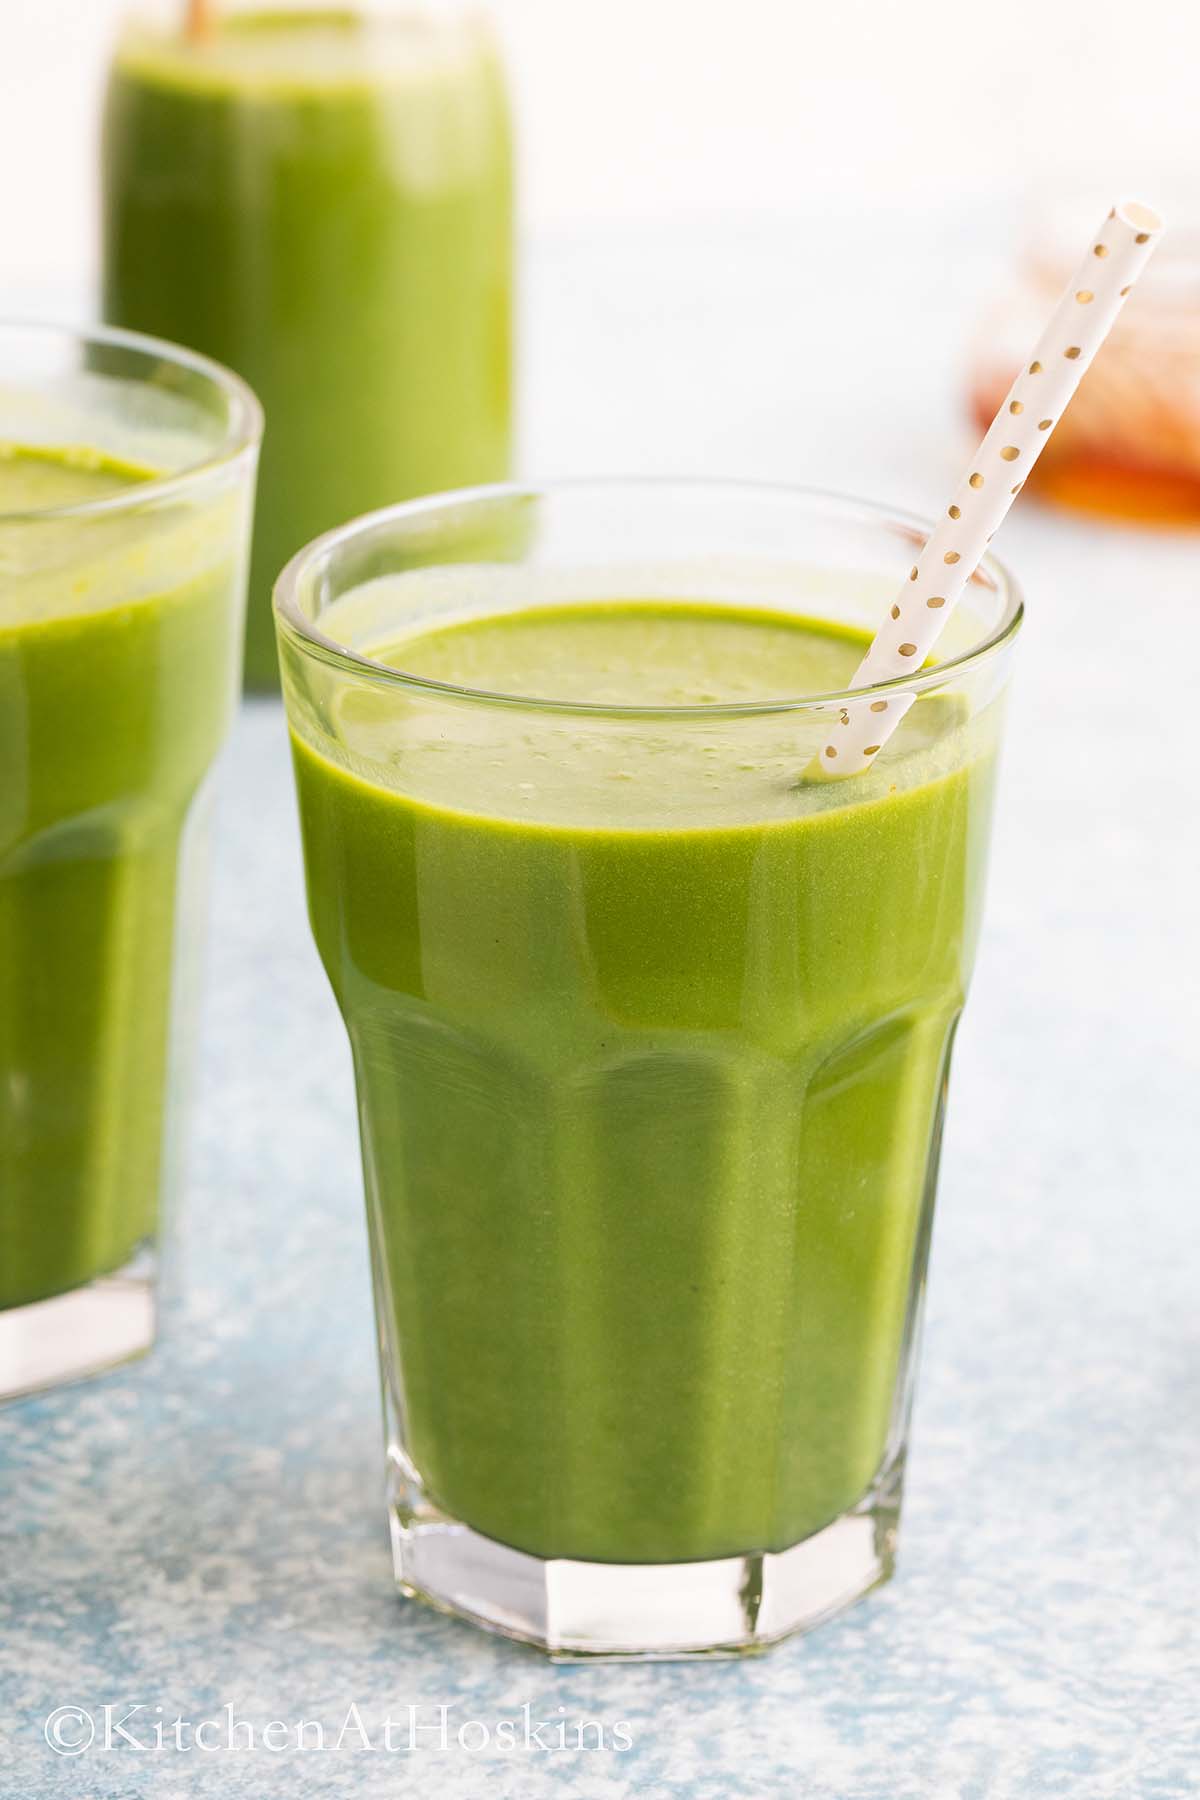 glasses filled with green smoothie along with straws.